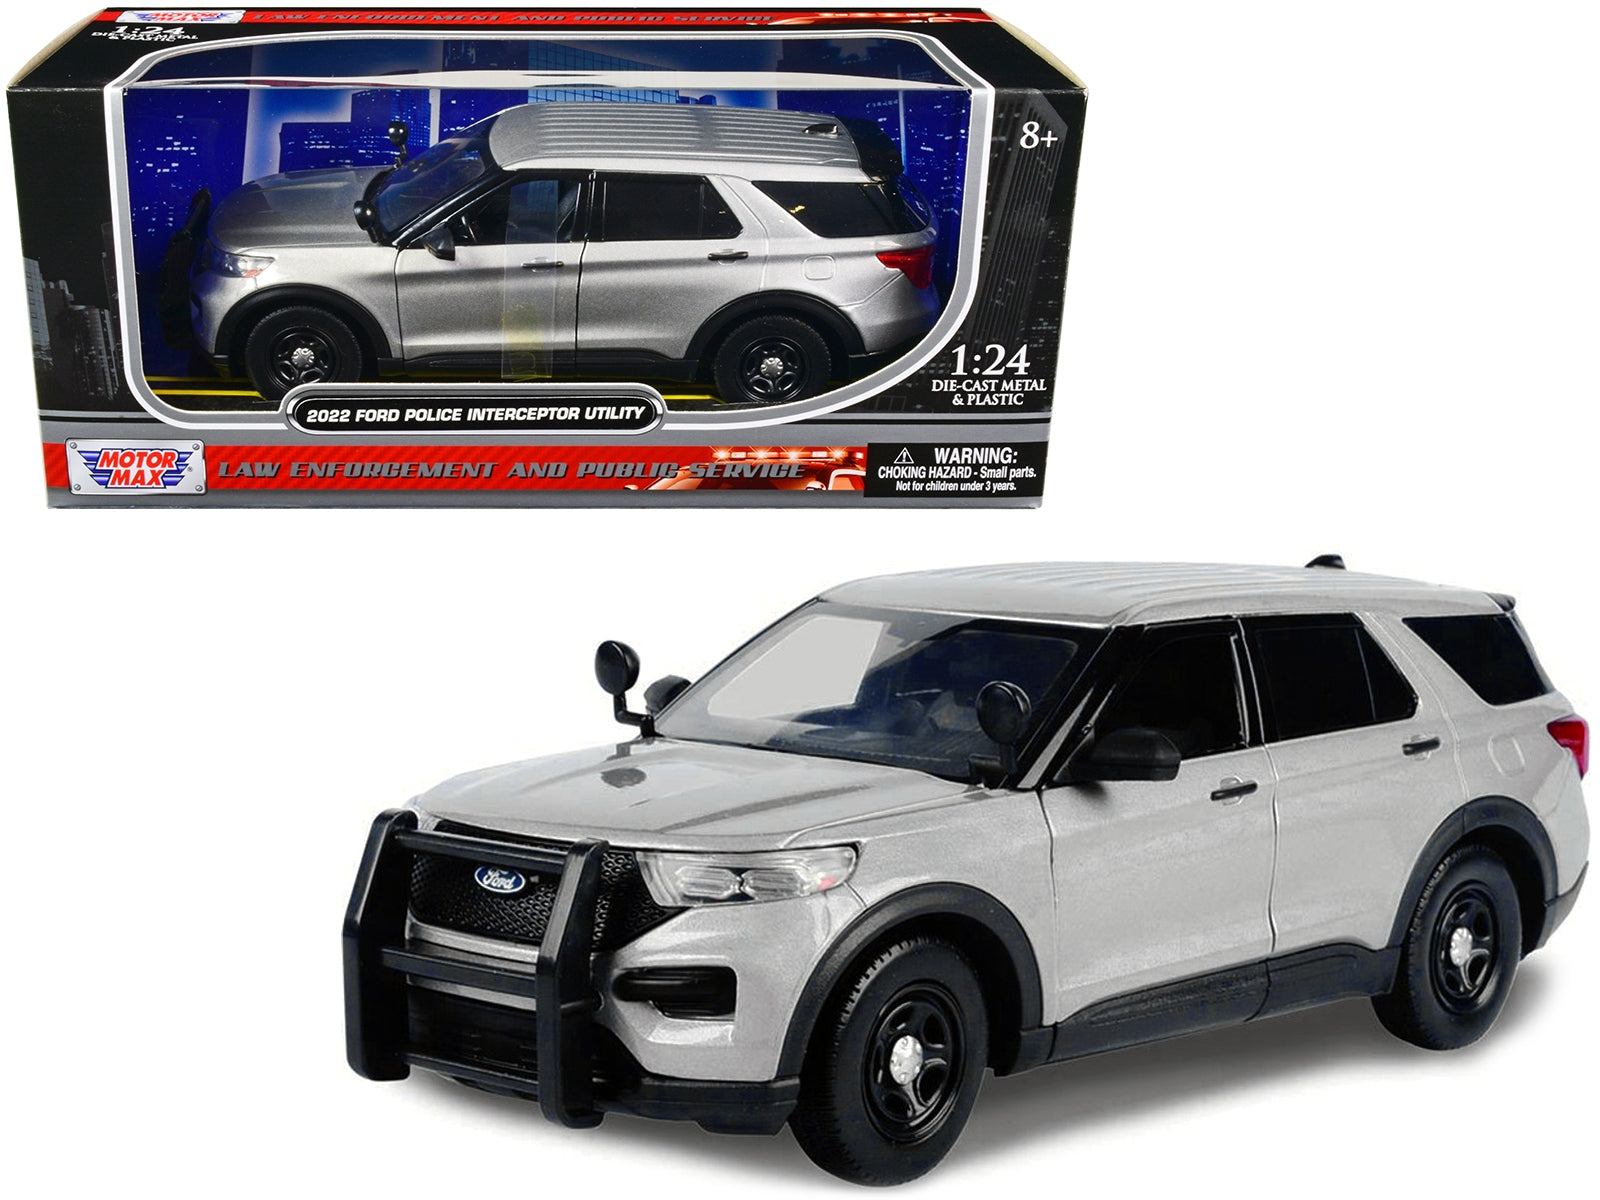 2022 Ford Police Interceptor Utility Unmarked Slick-Top Silver 1/24 Diecast Model Car by Motormax